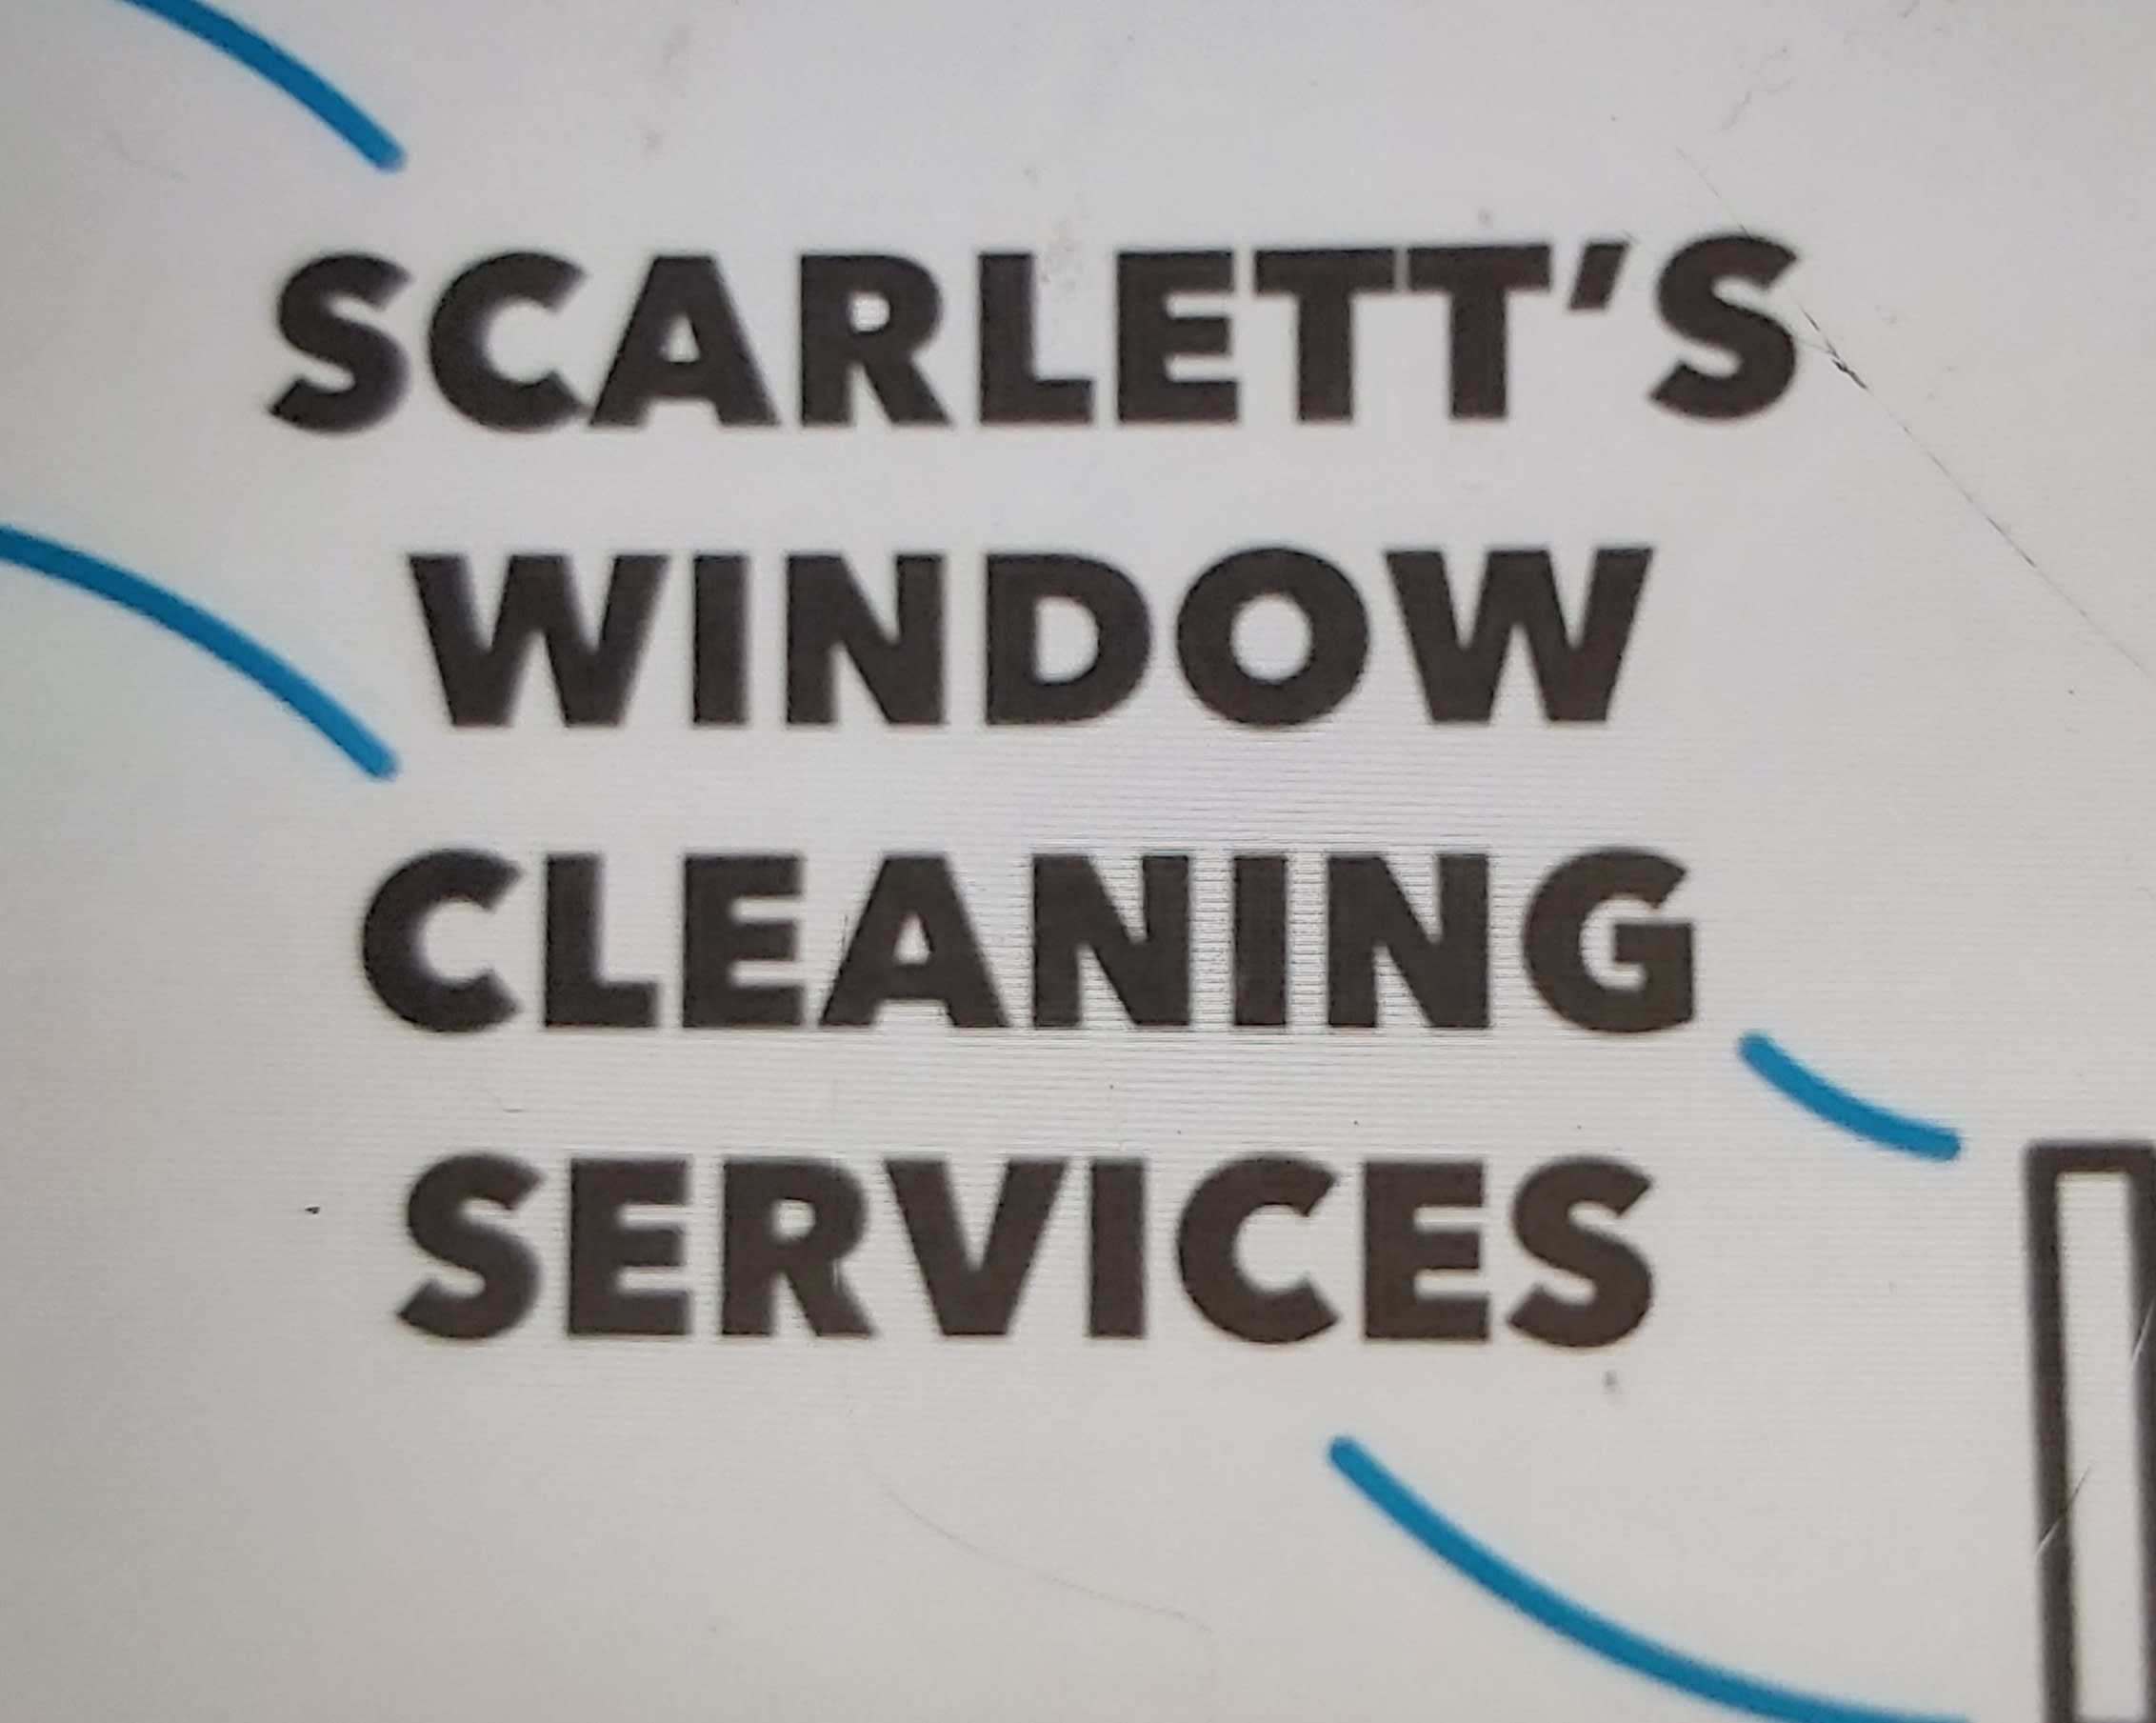 Scarlett's Window Cleaning Services